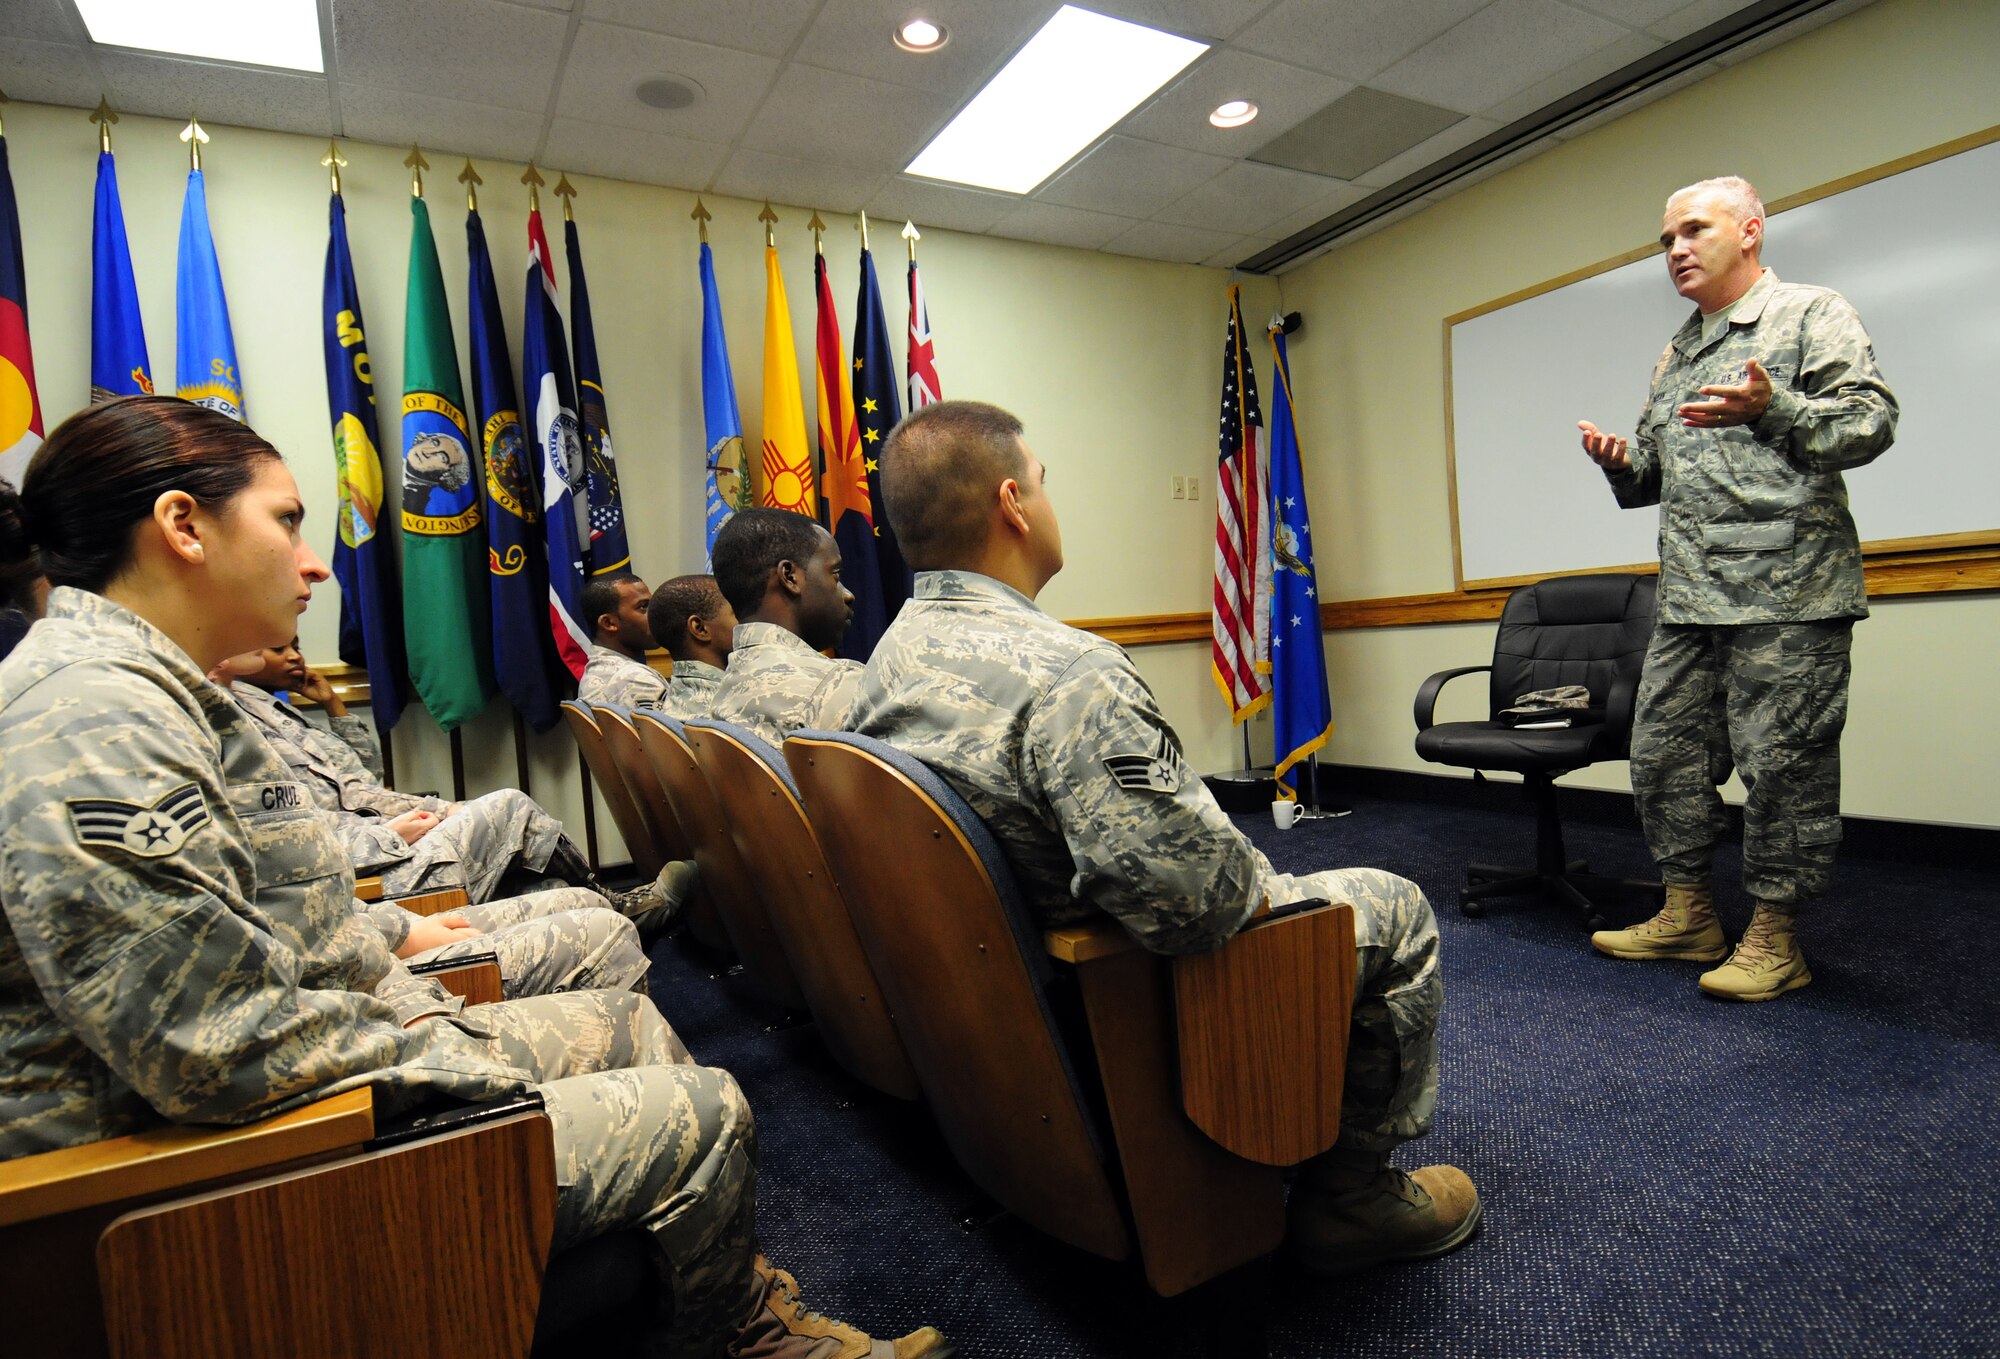 ANDERSEN AIR FORCE BASE, Guam - Pacific Air Forces Command Chief Master Sgt. Brooke McLean speaks to Airmen currently attending Airman Leadership School here Nov. 10. This is Chief McLean's first visit to Guam as PACAF's command chief.(U.S. Air Force photo by Airman 1st Class Courtney Witt)